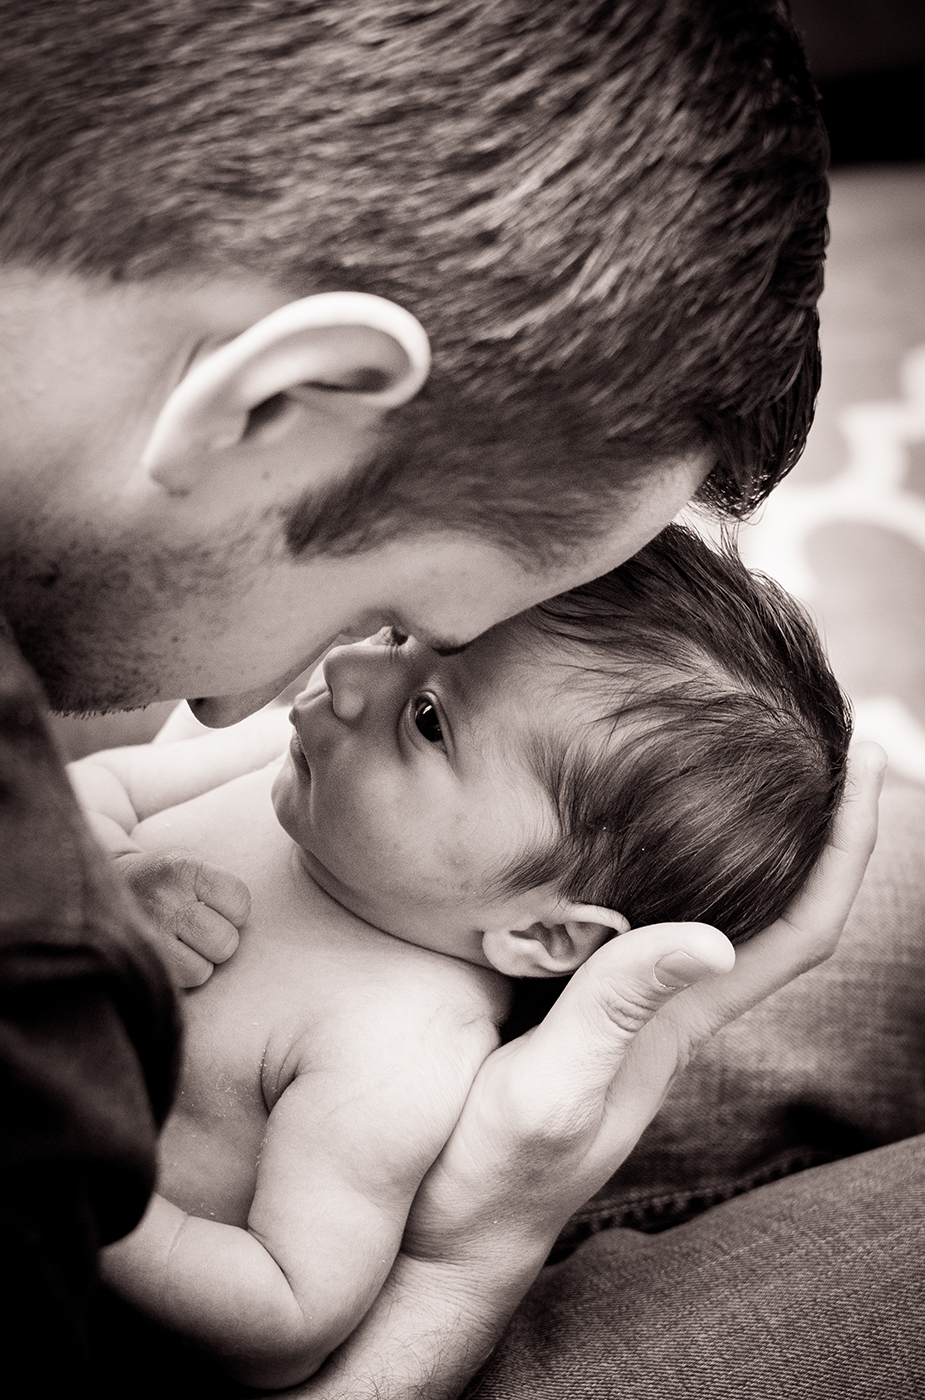 All Occasions Photography Albany NY - Newborn Photography Dad & Baby Black & White